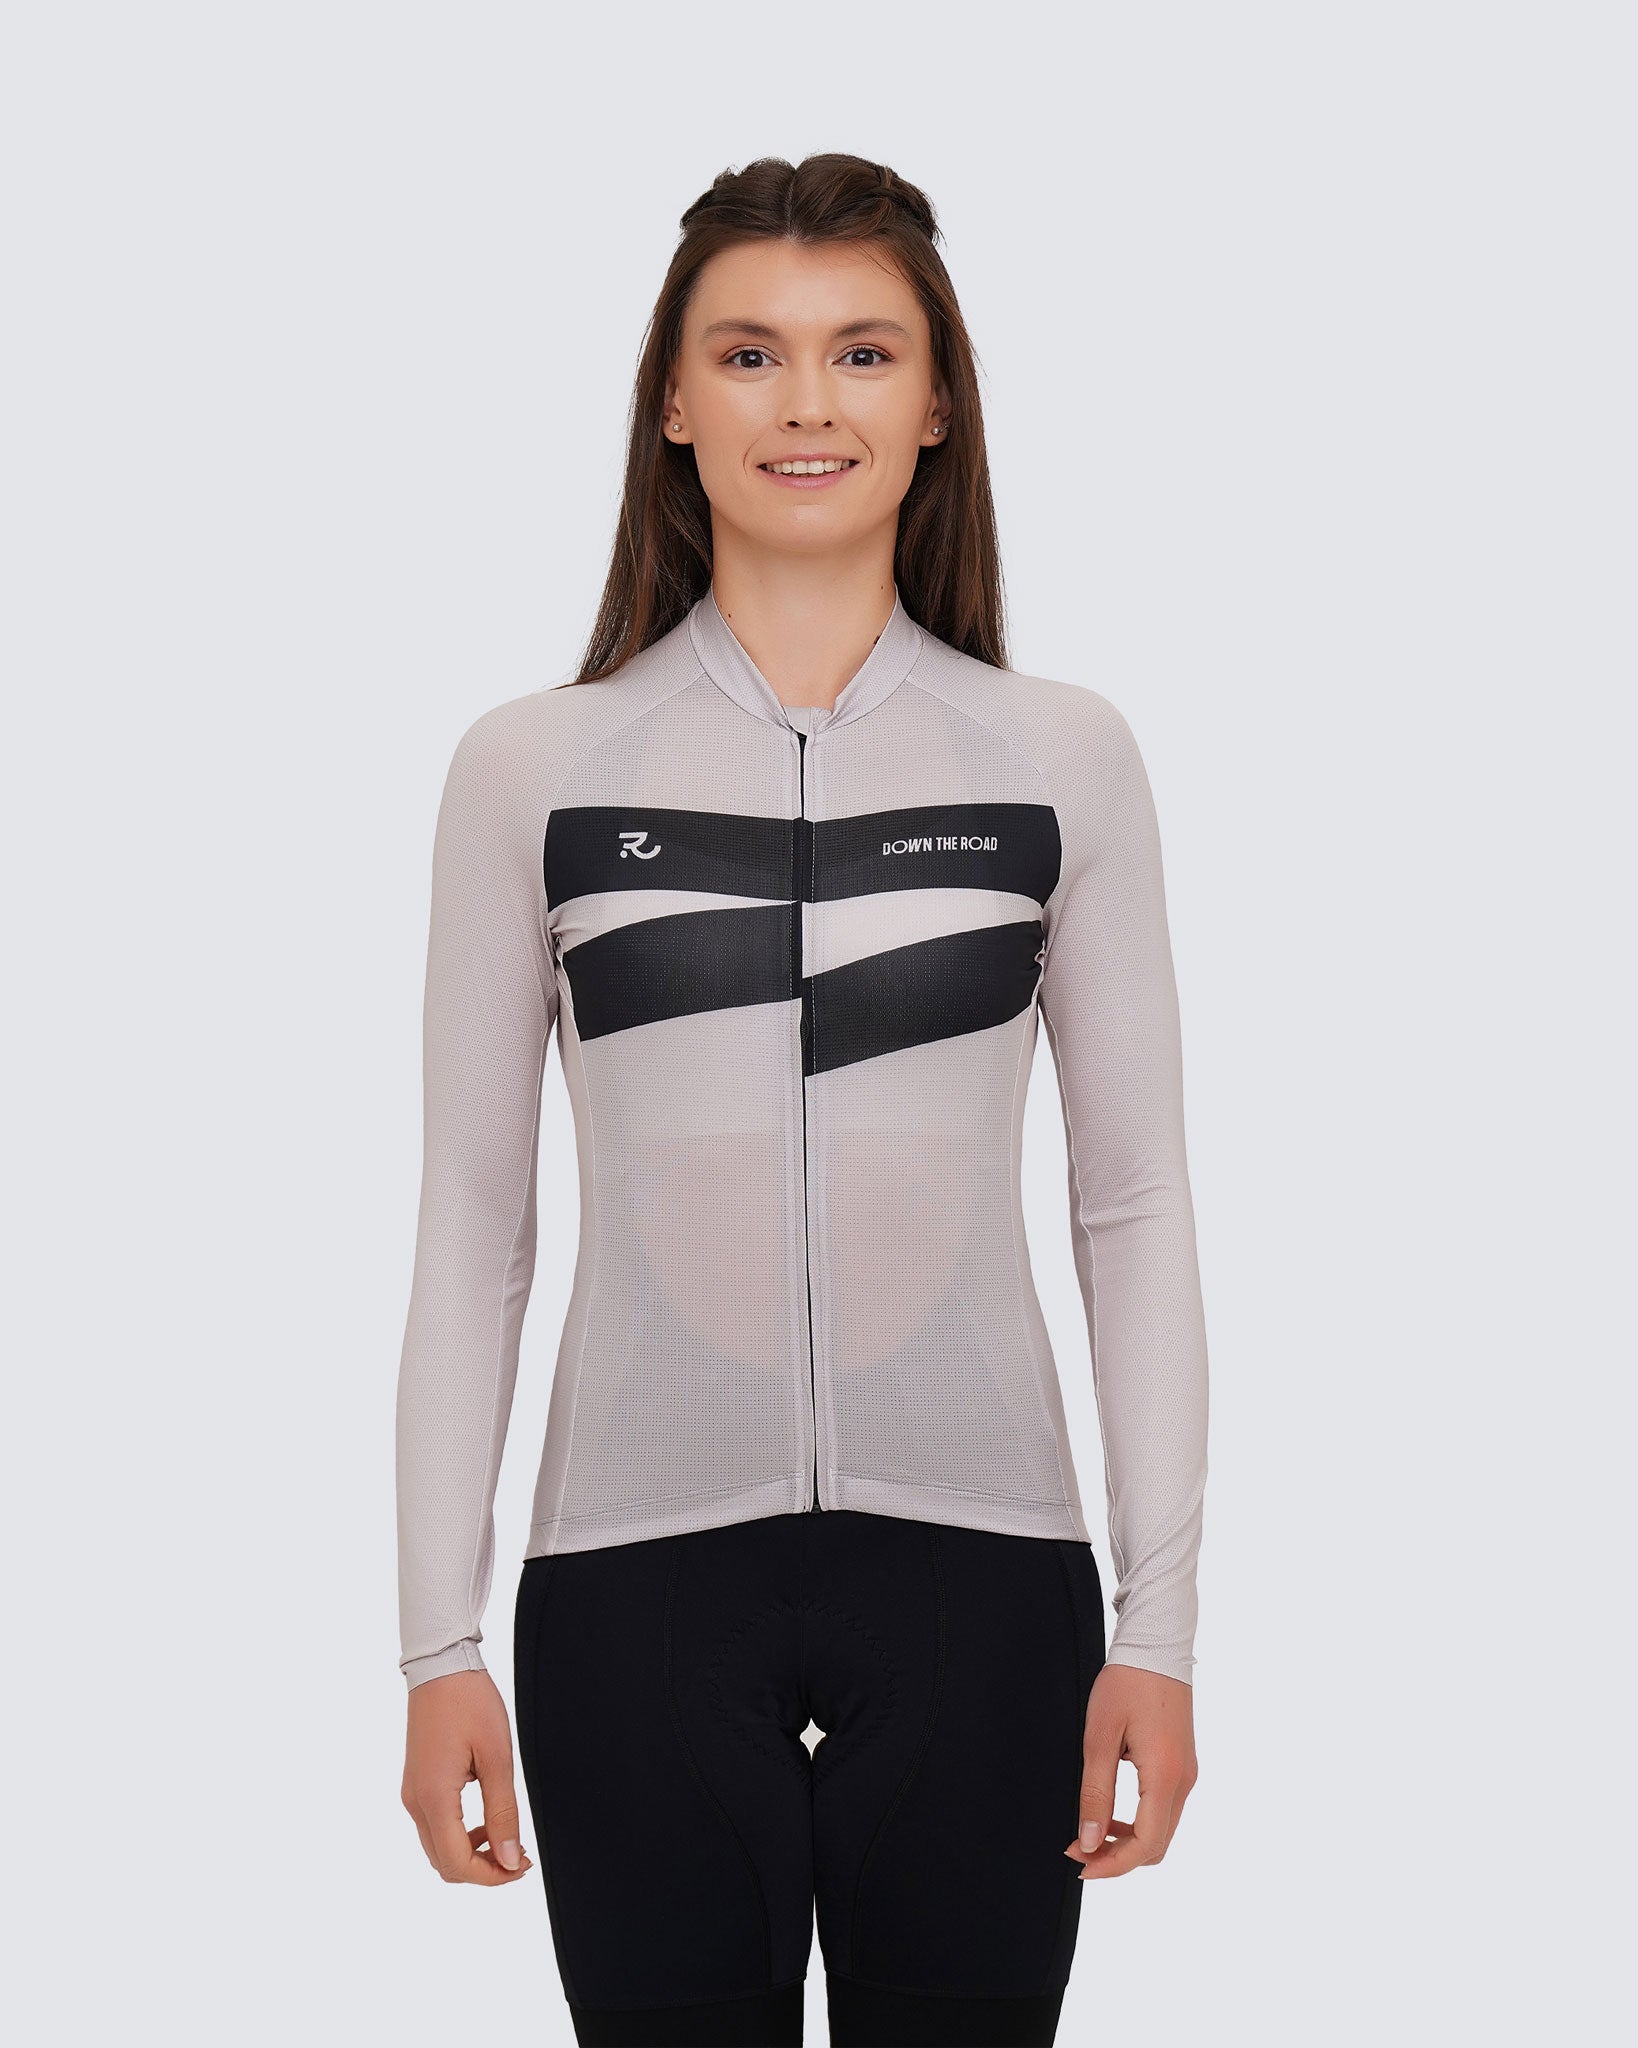 front view of long sleeve grey jersey with black pattern